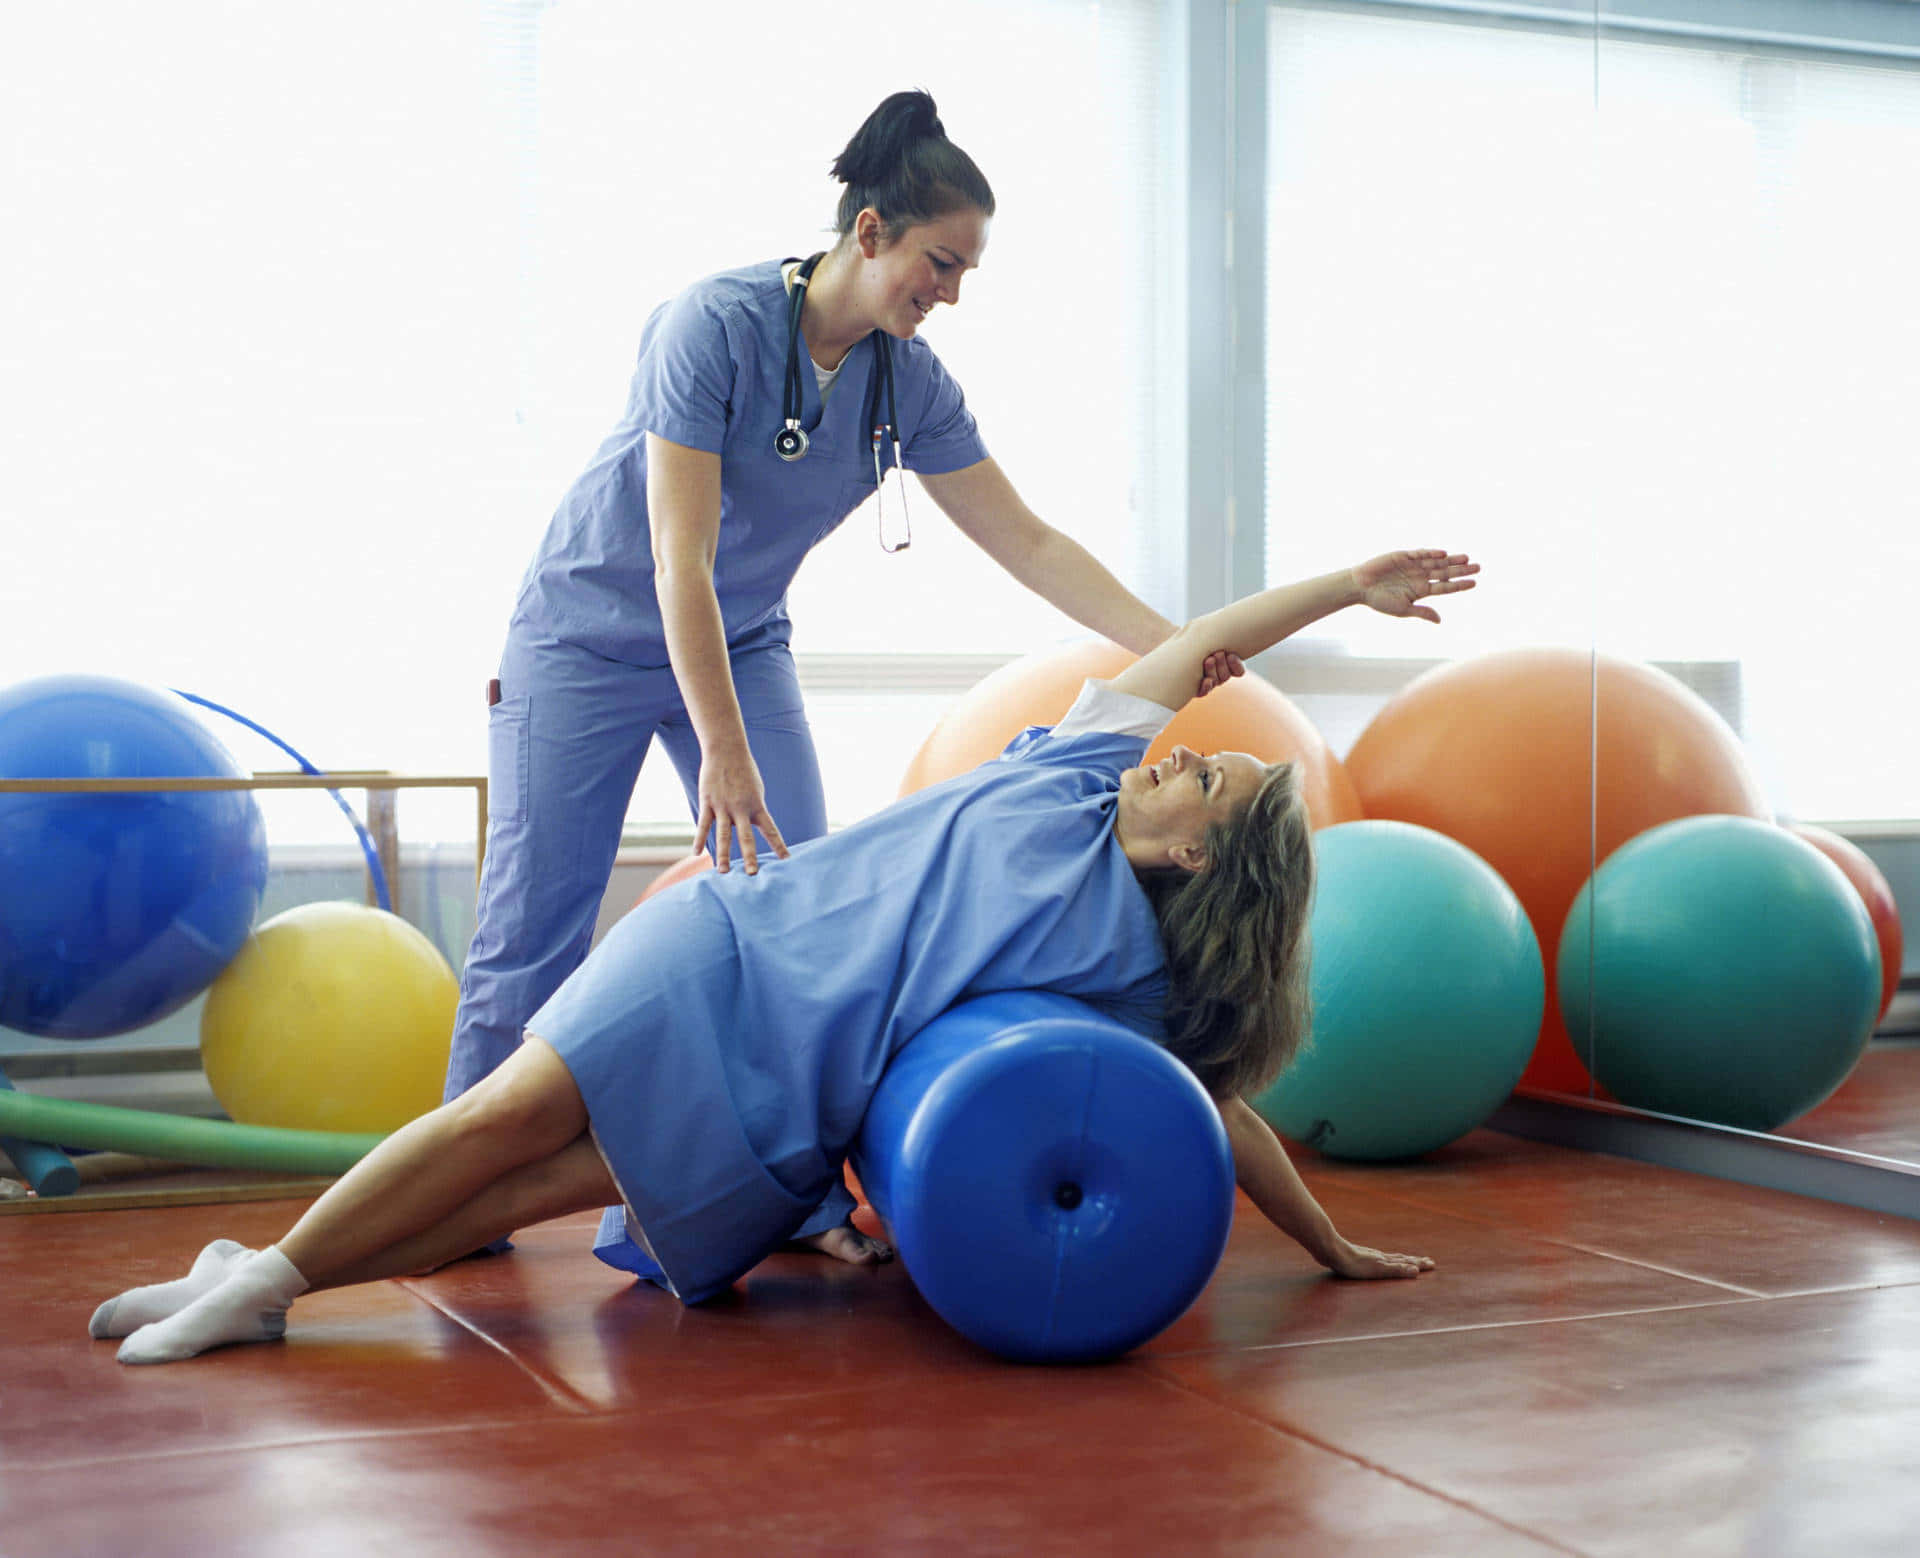 Caption: Young Woman Performing Stretching Exercises in Physical Therapy Wallpaper